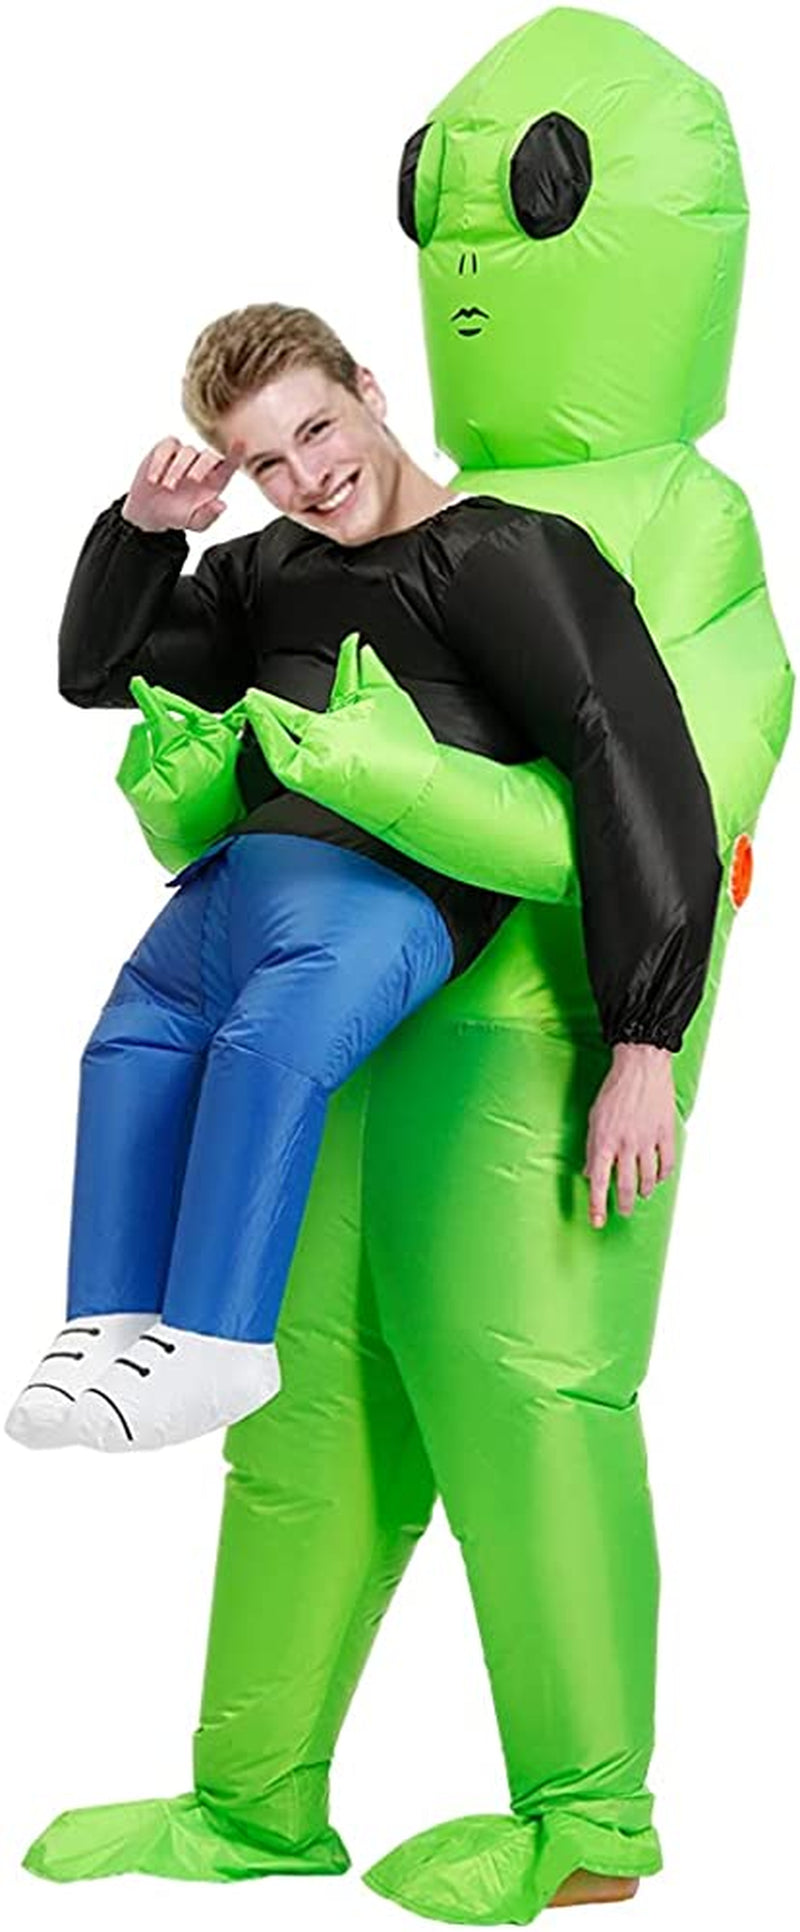 Poptrend Inflatable Alien Costume Inflatable Halloween Costumes Blow up Alien Costume for Halloween, Easter,Christmas…  Poptrend   